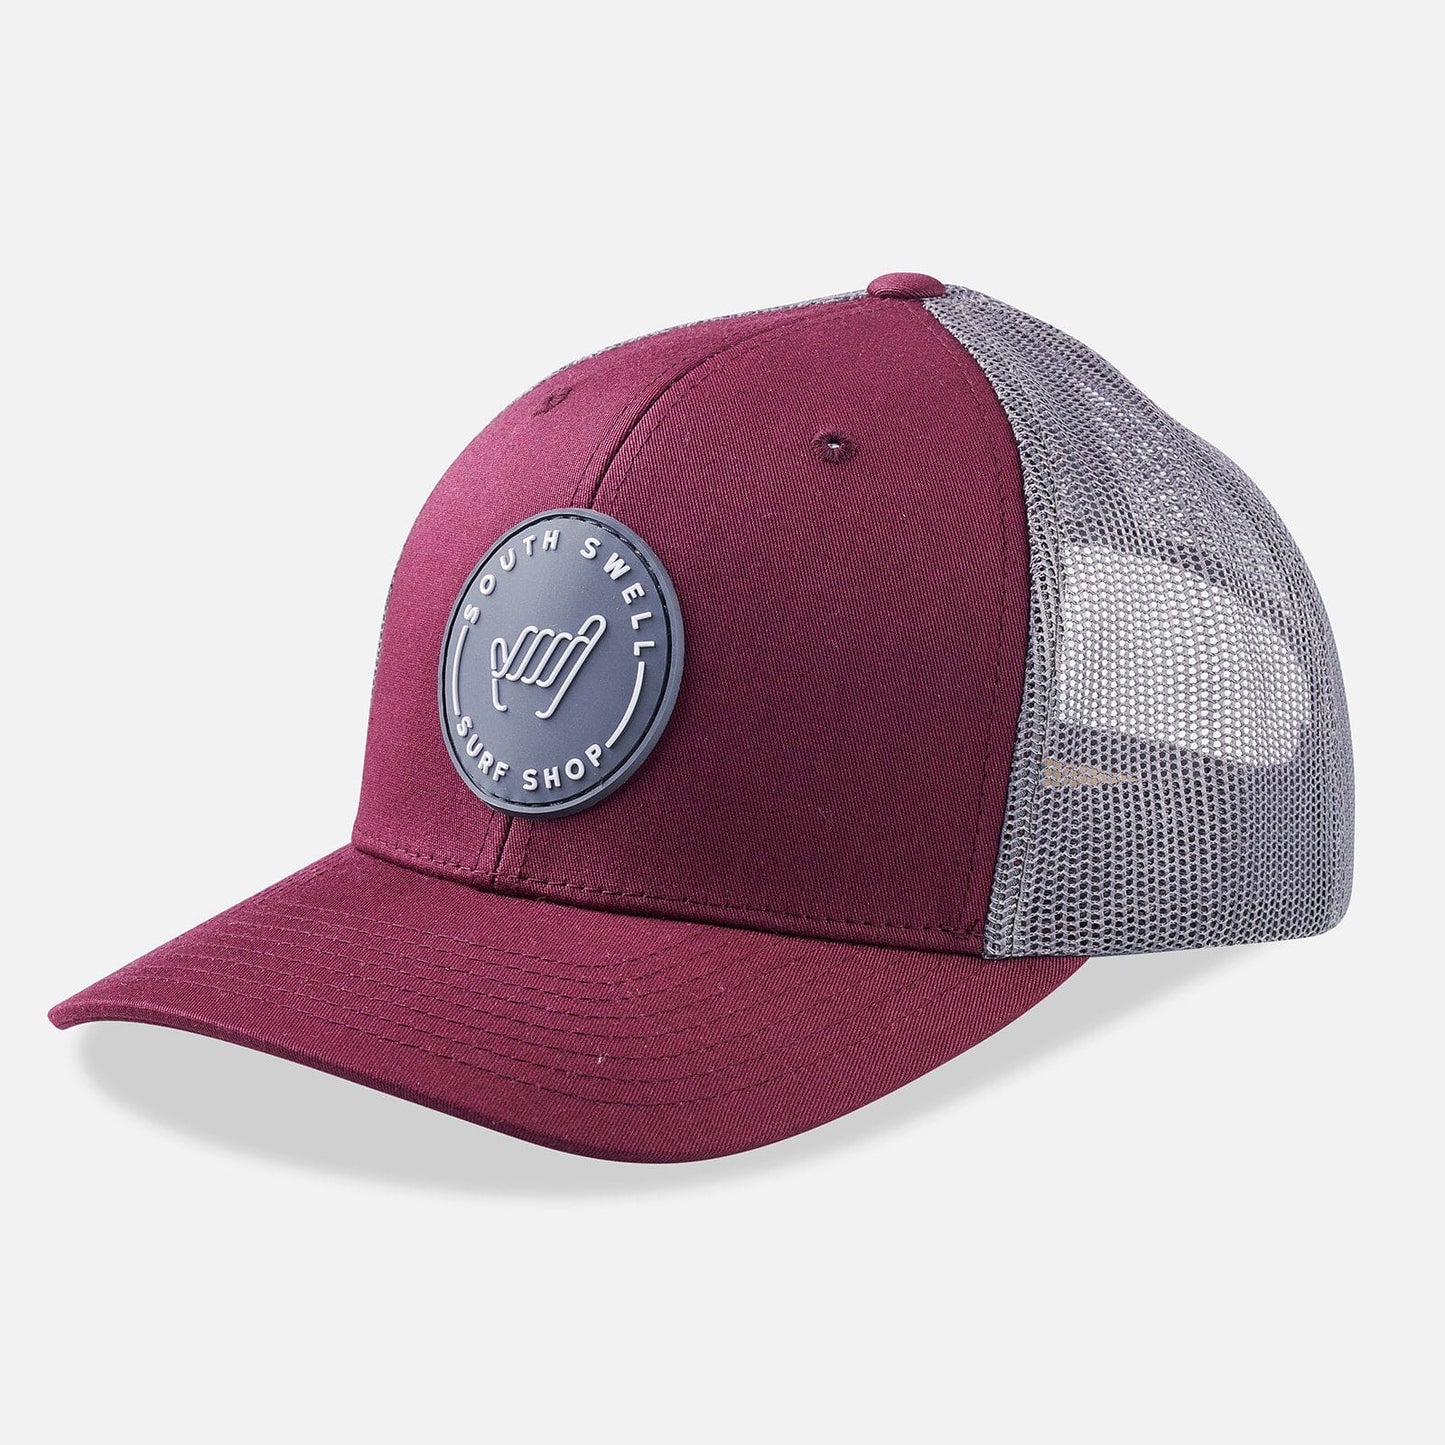 SOUTH SWELL Shaka Patch Trucker Hat Hats SOUTH SWELL 